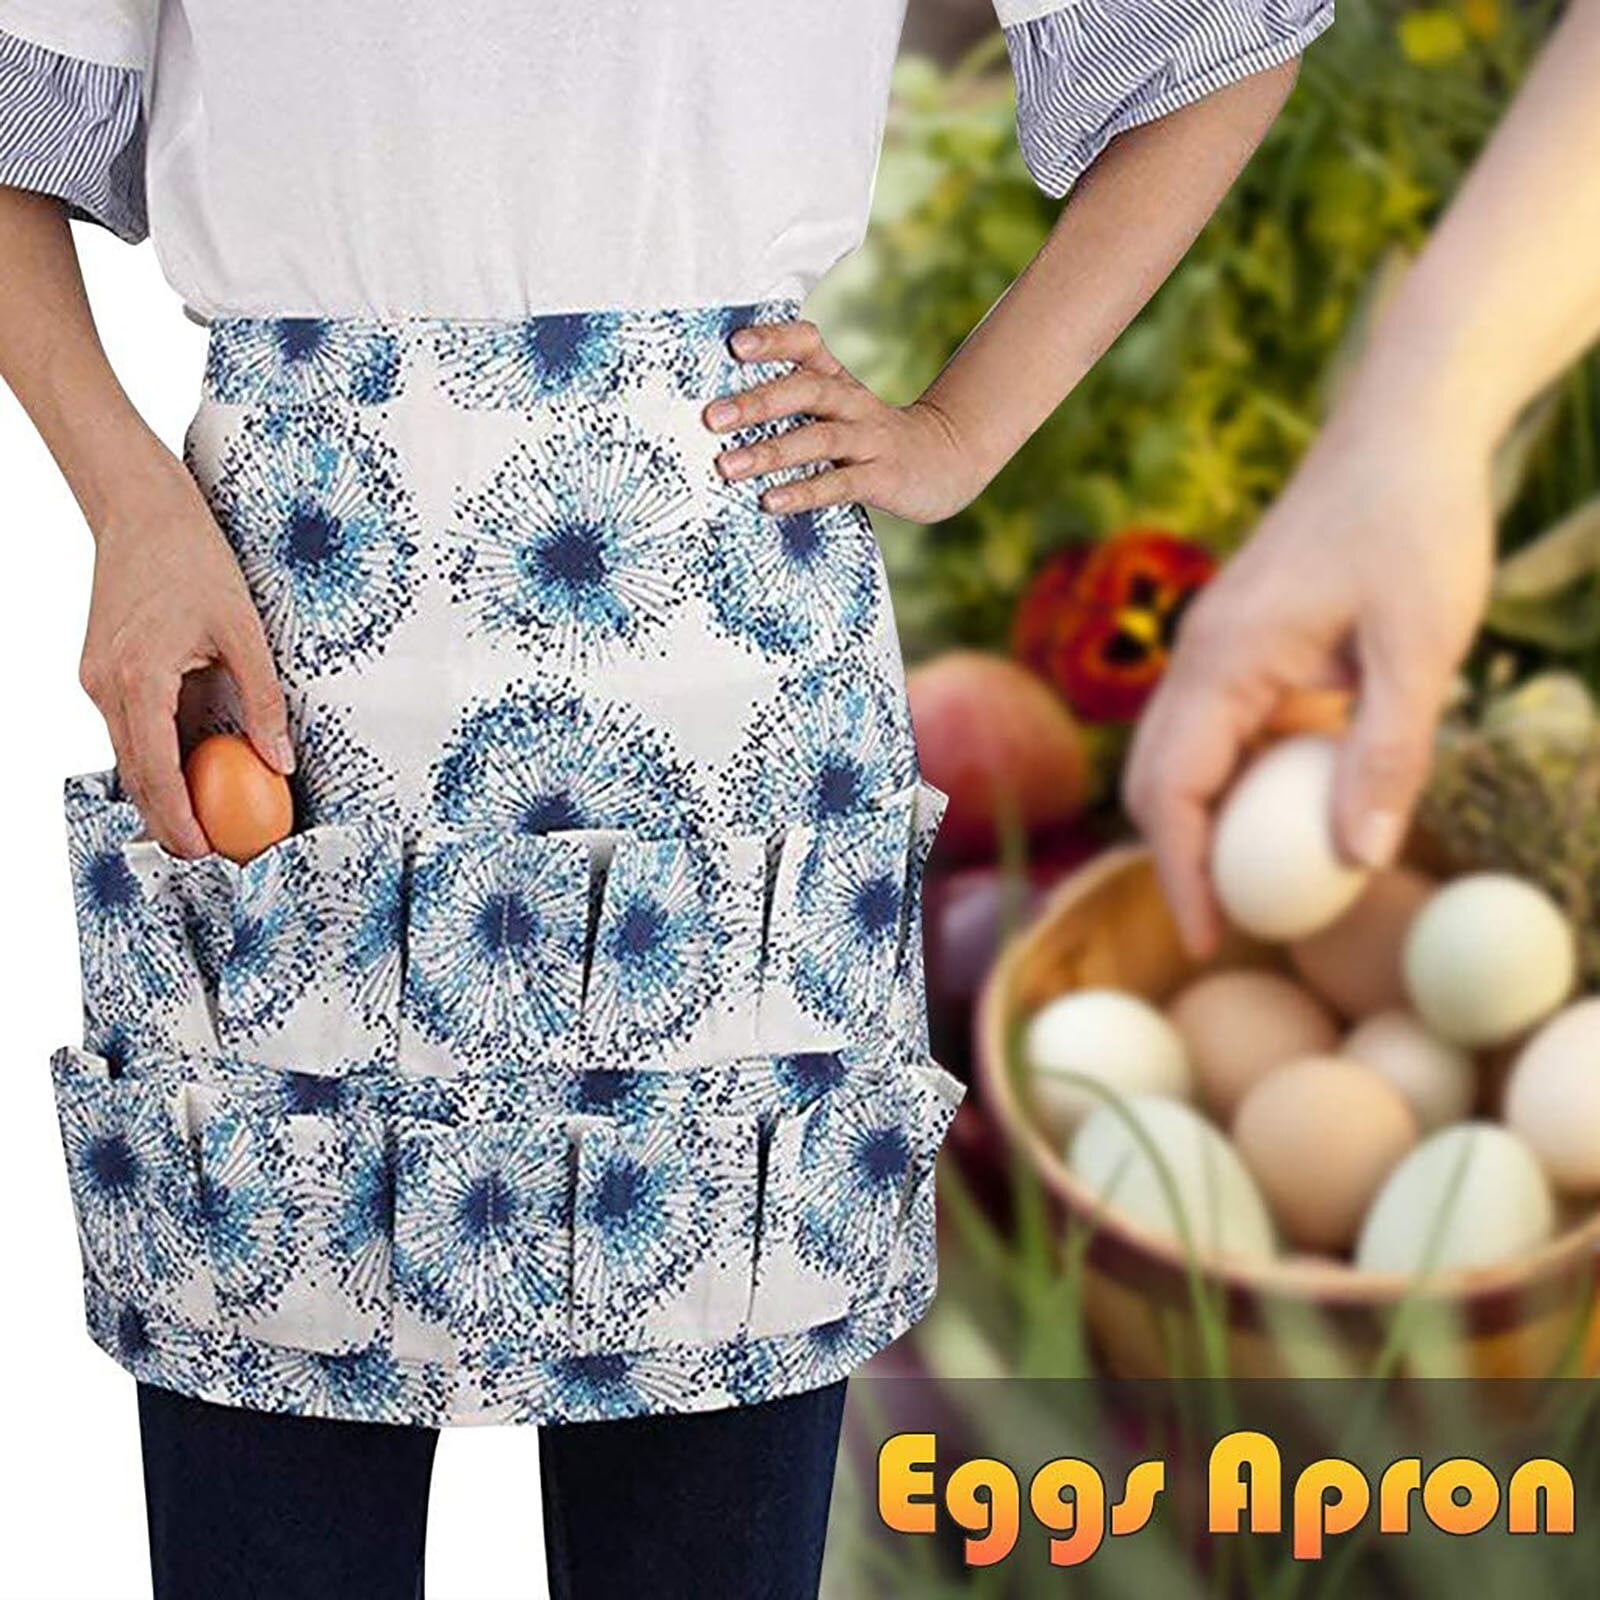 Home Chicken Egg Collecting Holding Waist Apron - 